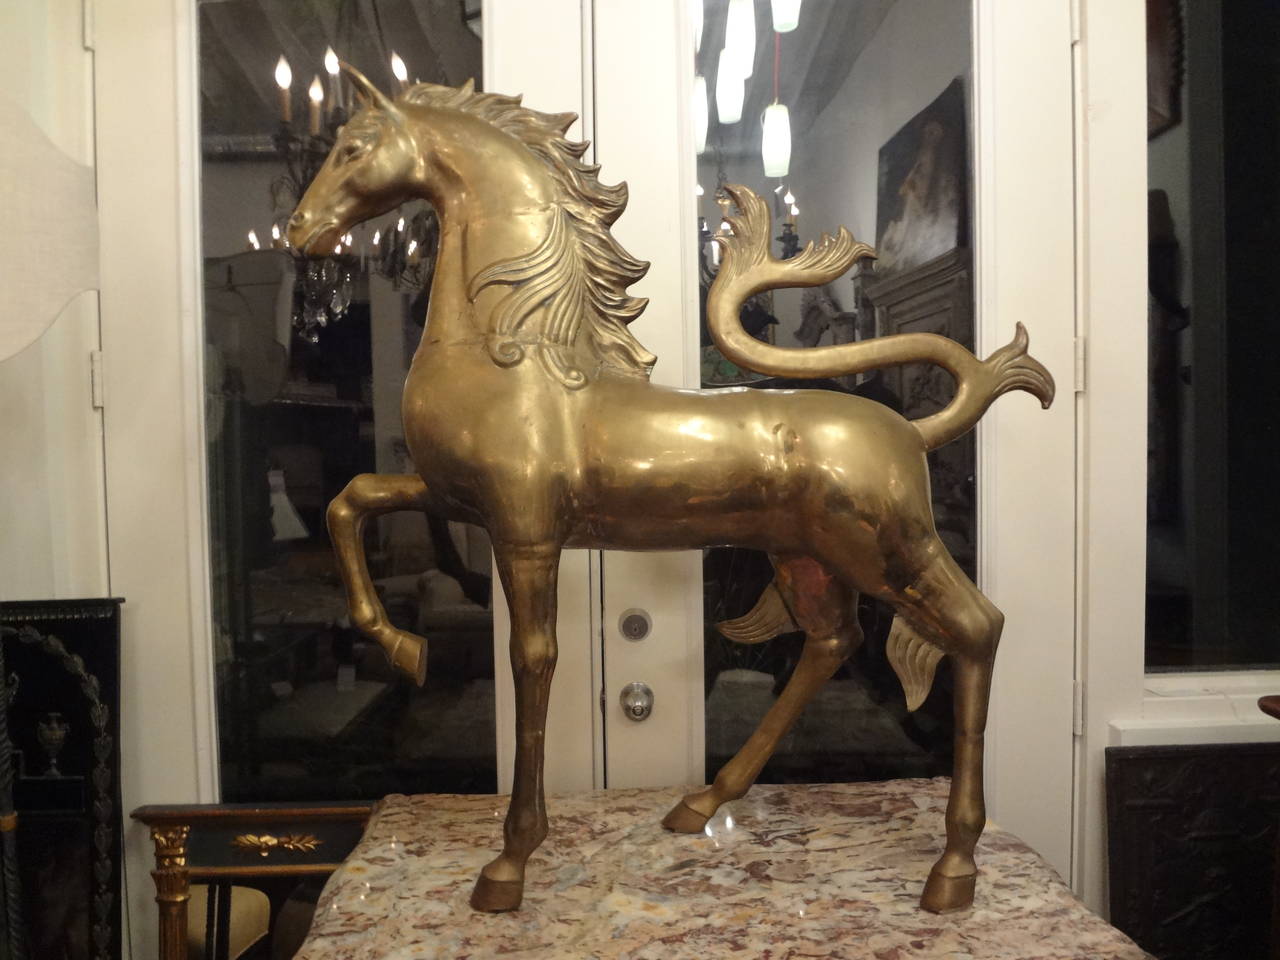 Monumental Mid-Century mythological brass unicorn or horse.

Please click KIRBY ANTIQUES logo below to view additional pieces from our vast inventory.